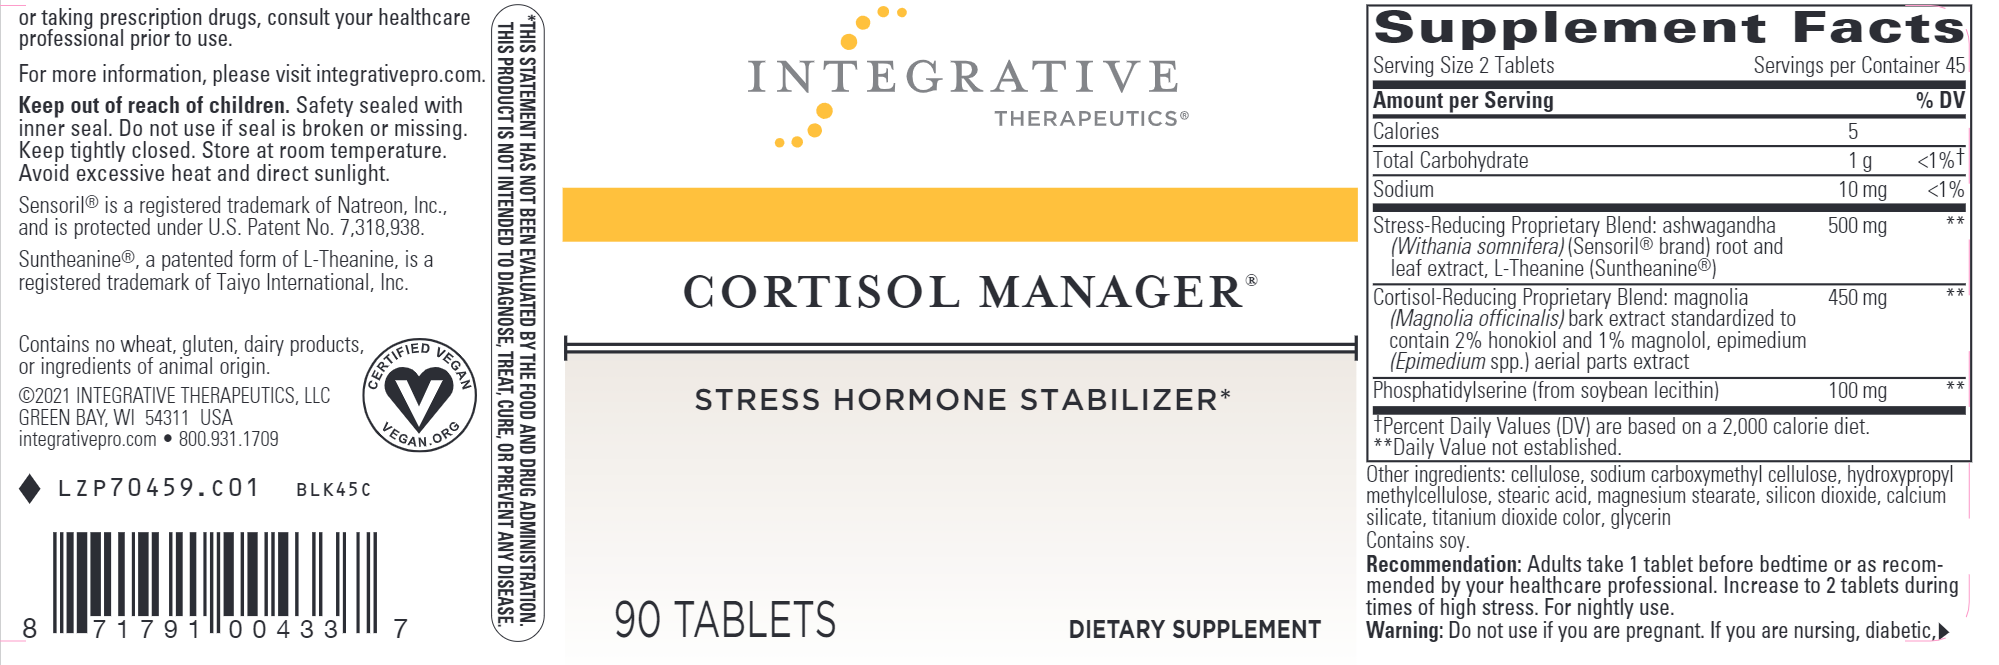 Cortisol Manager?